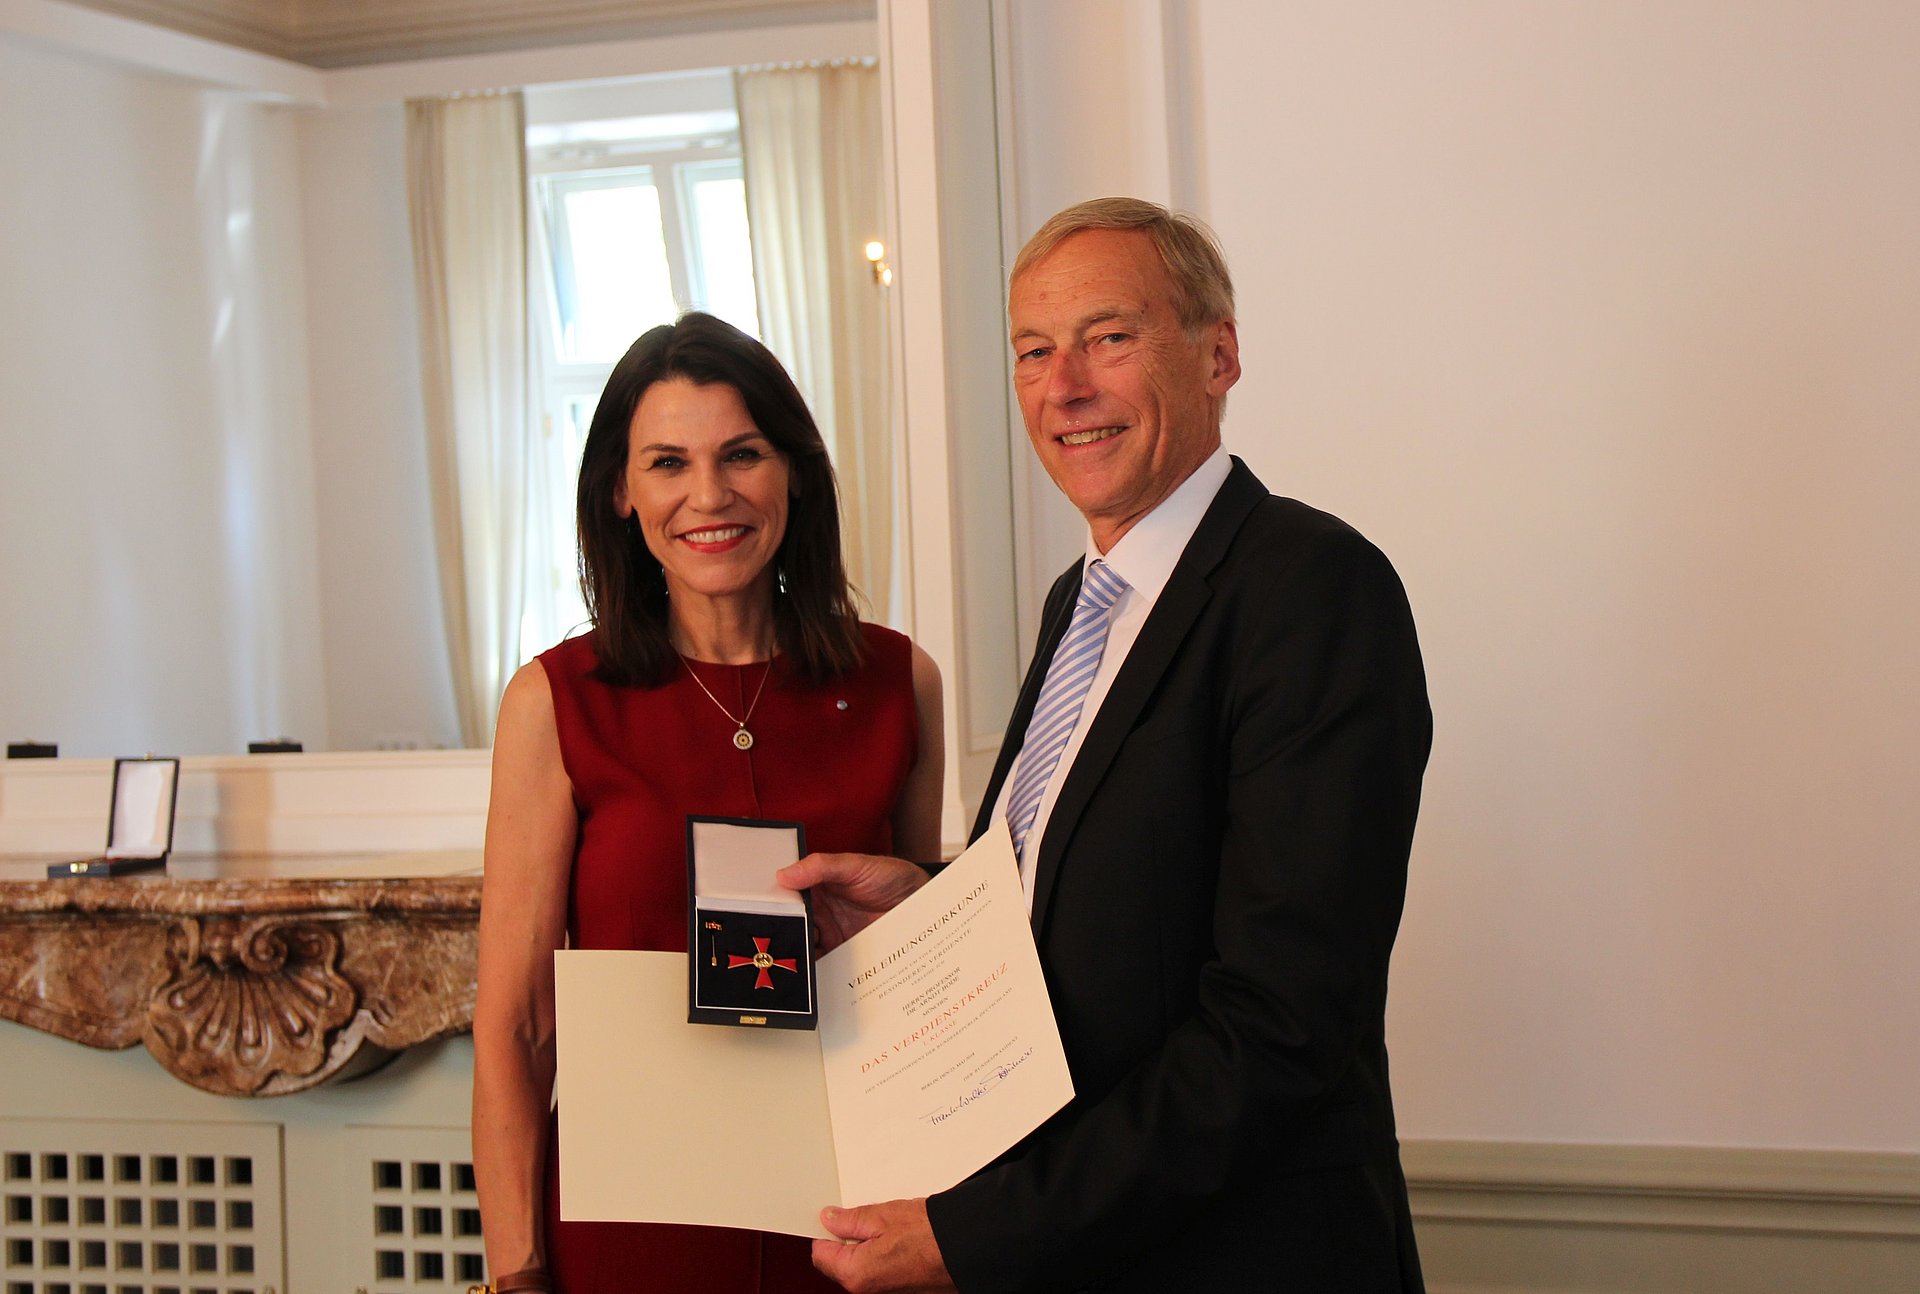 State minister Marion Kiechle presented Arndt Bode with the Federal Cross of Merit. (Photo: StMWK)